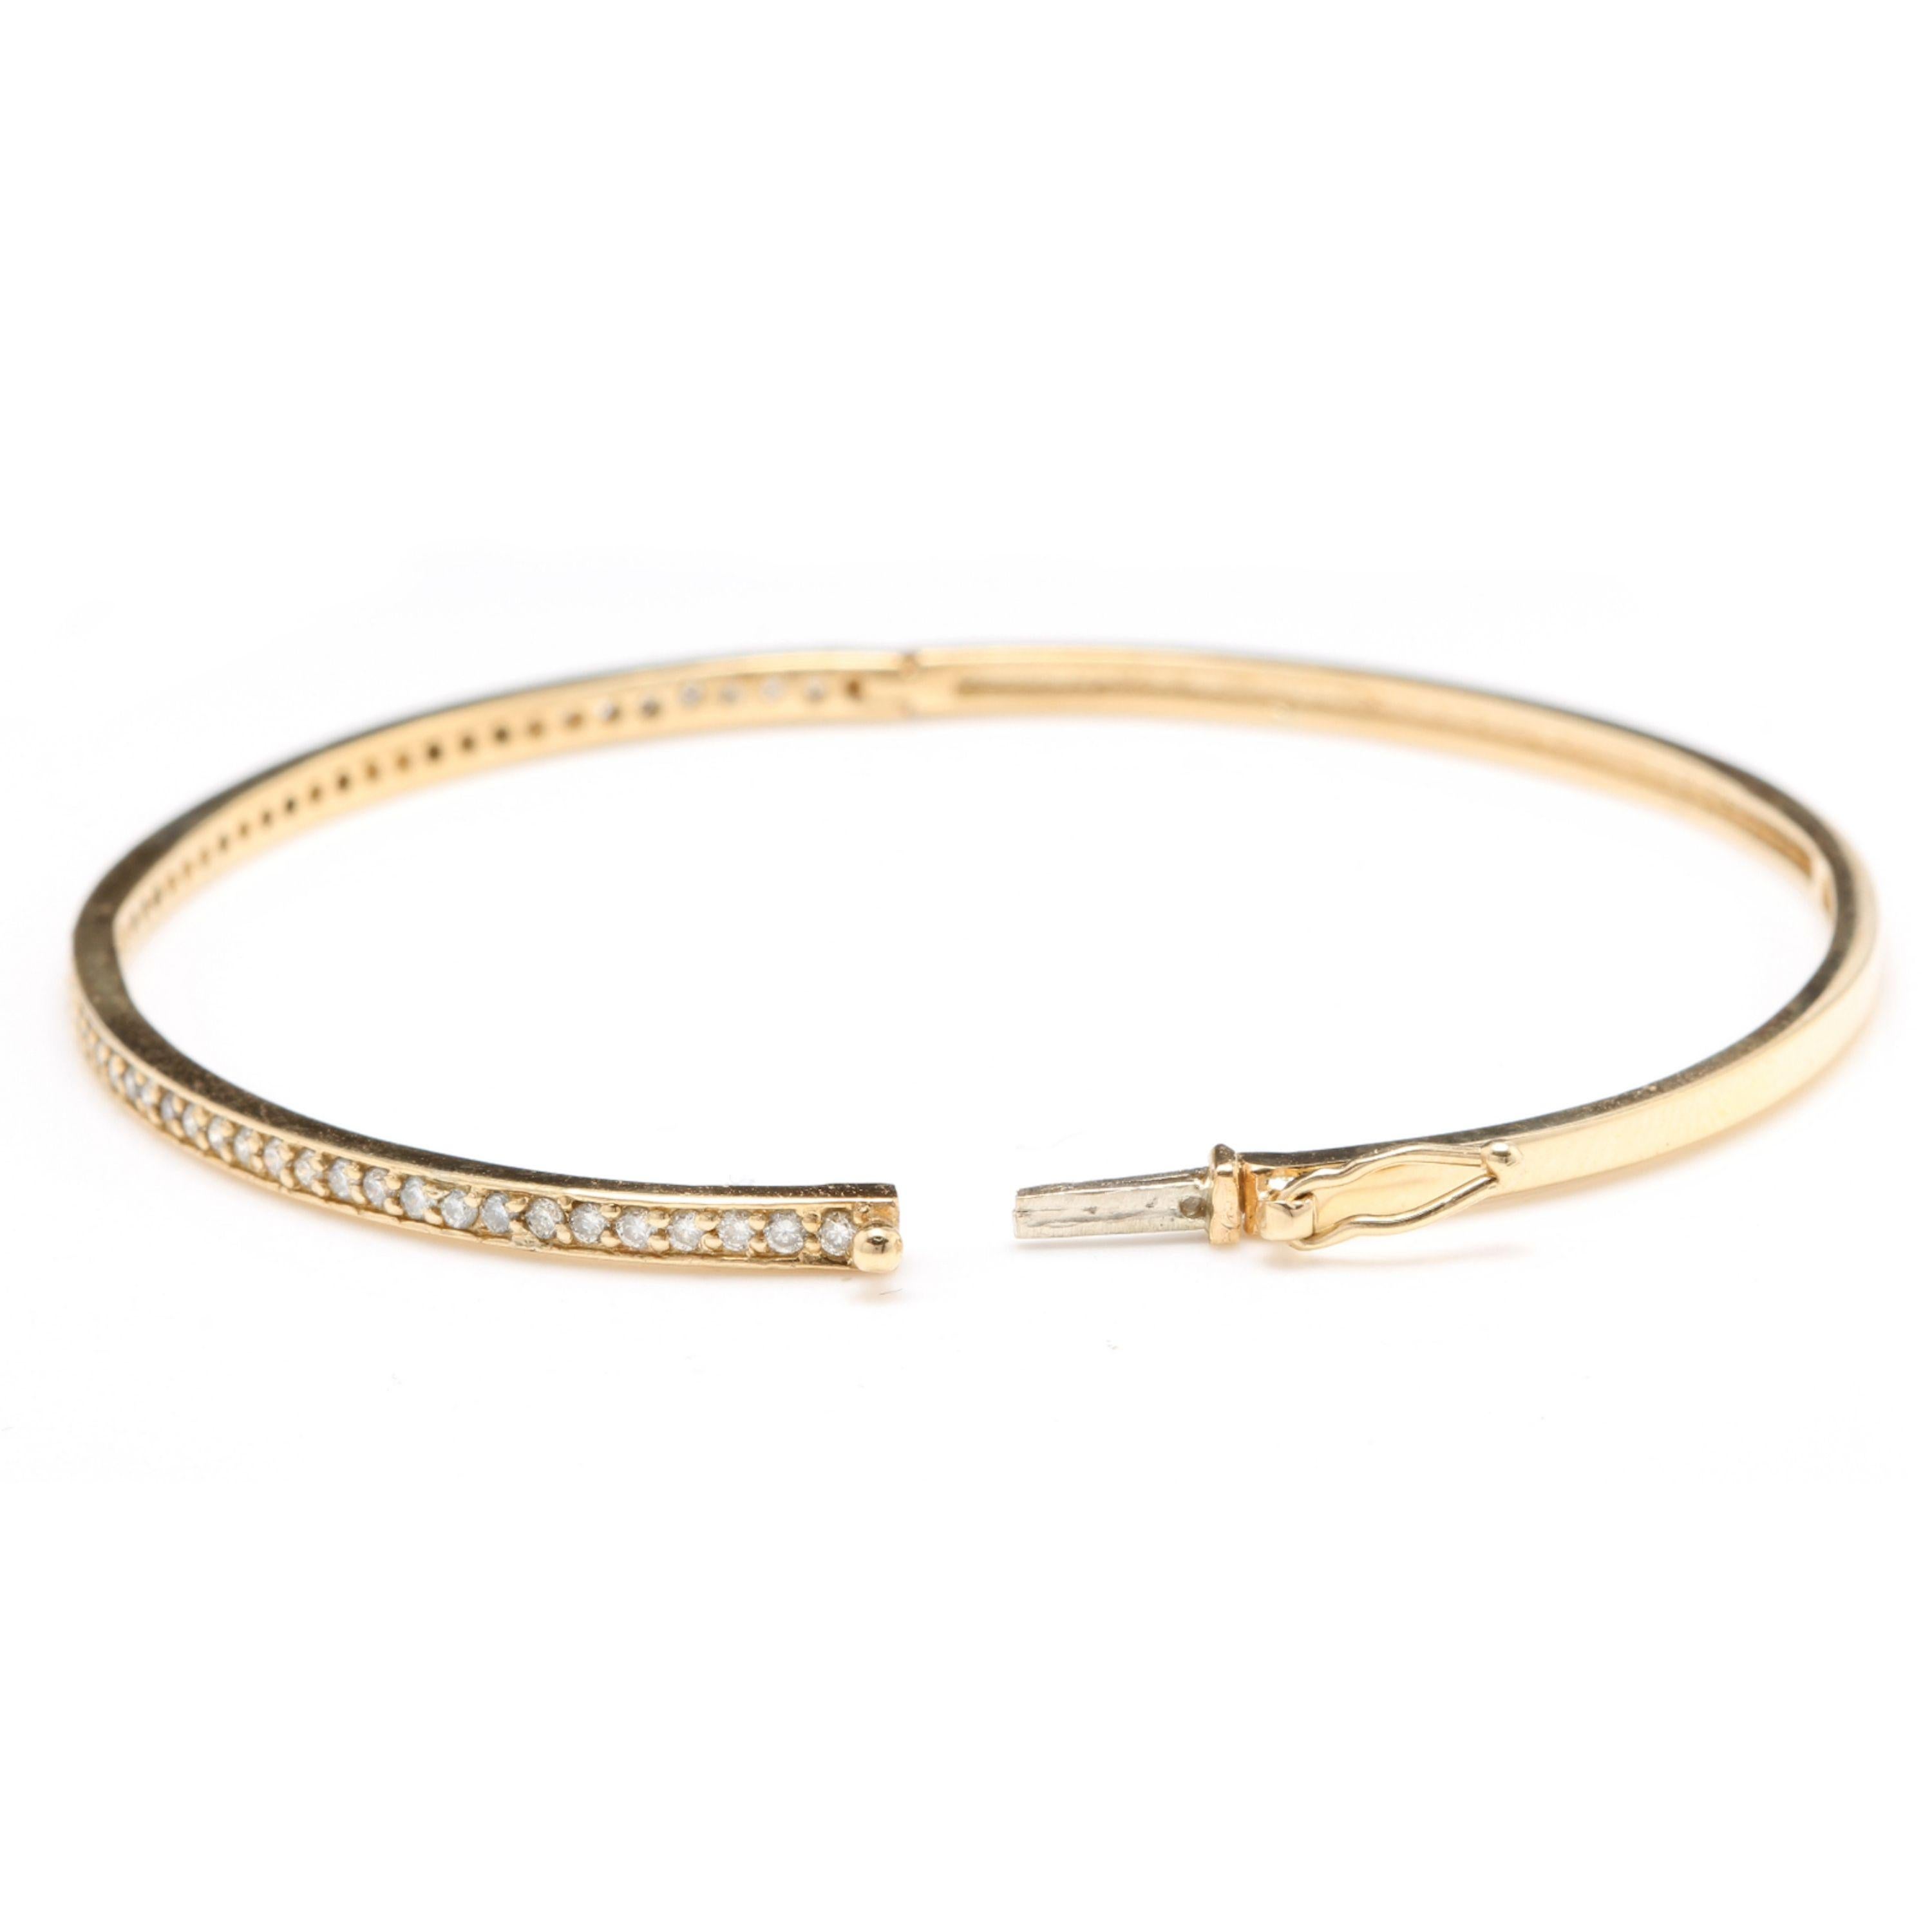 Very Impressive 0.75 Carats Natural Diamond 14K Solid Yellow Gold Bangle Bracelet

STAMPED: 14K


Total Natural Round Diamonds Weight: Approx. 0.75 Carats (color G-H / Clarity SI1-SI2)

Bangle Wrist Size is: 7 inches

Width: 2.42mm

Bracelet total